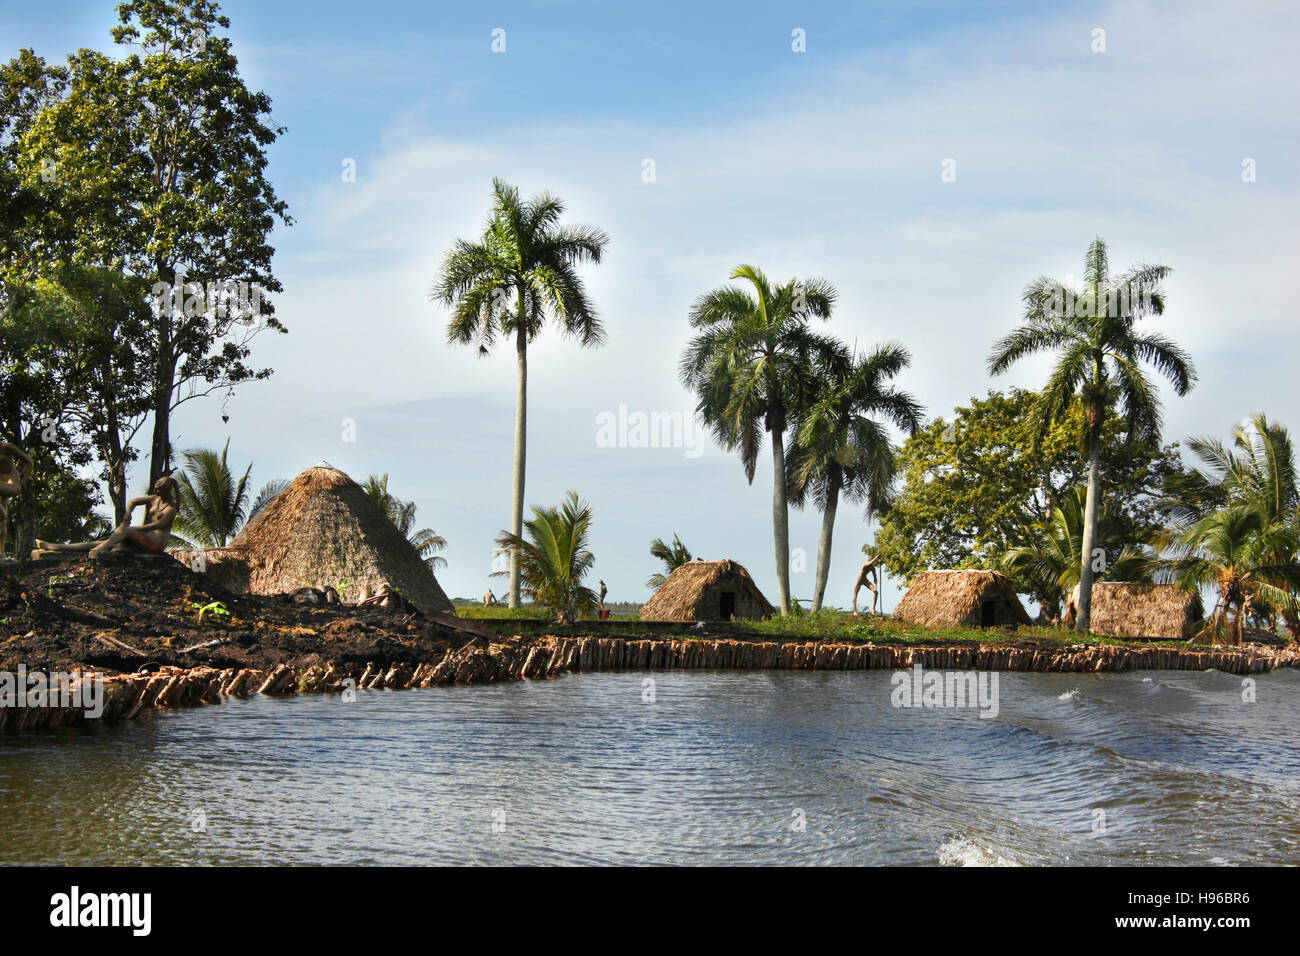 Beautiful landscape of small islands with traditional straw hut homes and palm trees, Guama, Cuba, Caribbean. Stock Photo